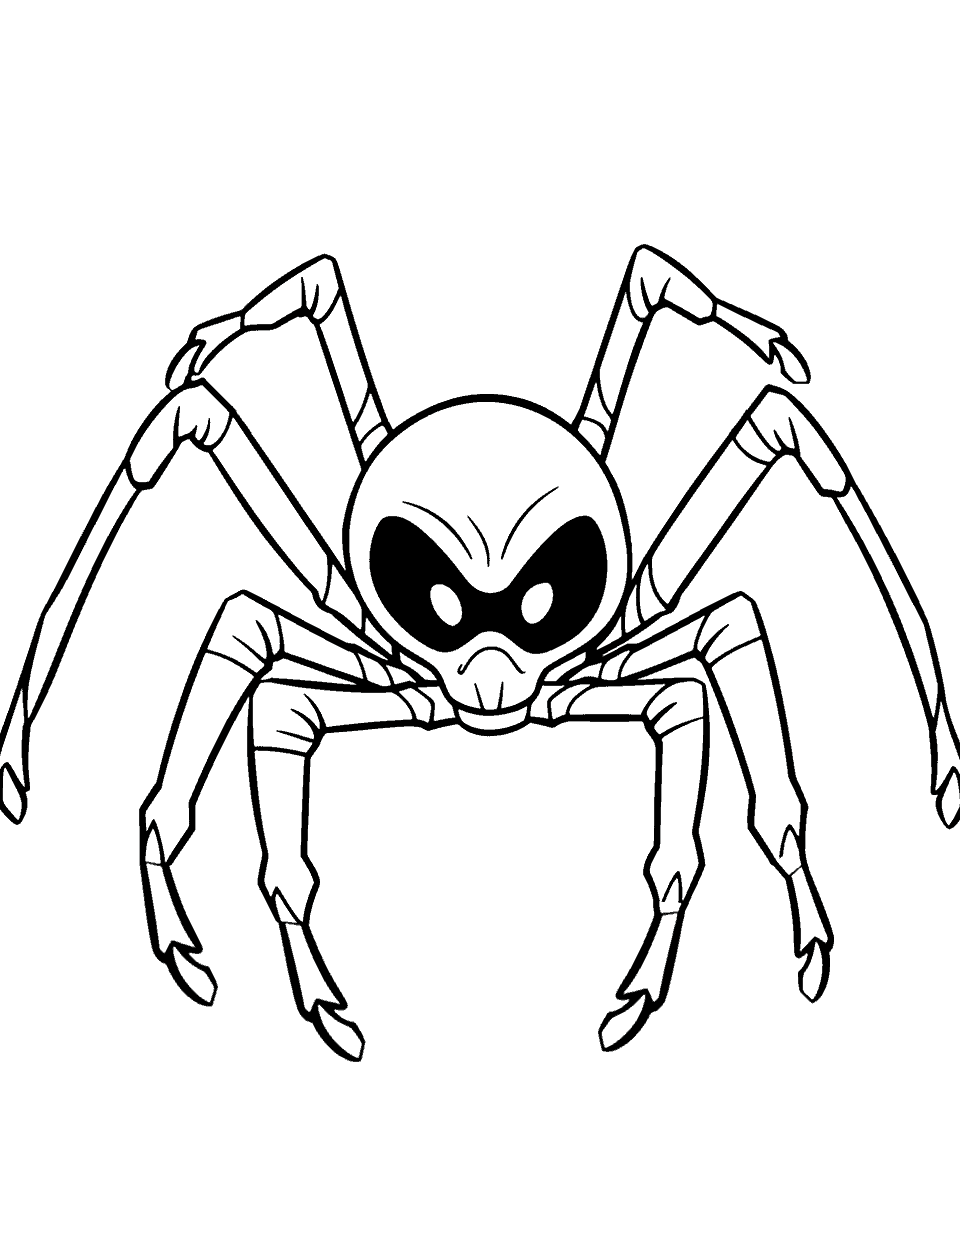 Ninja Spider in Action Coloring Page - A spider dressed as a ninja, ready for a stealth mission.